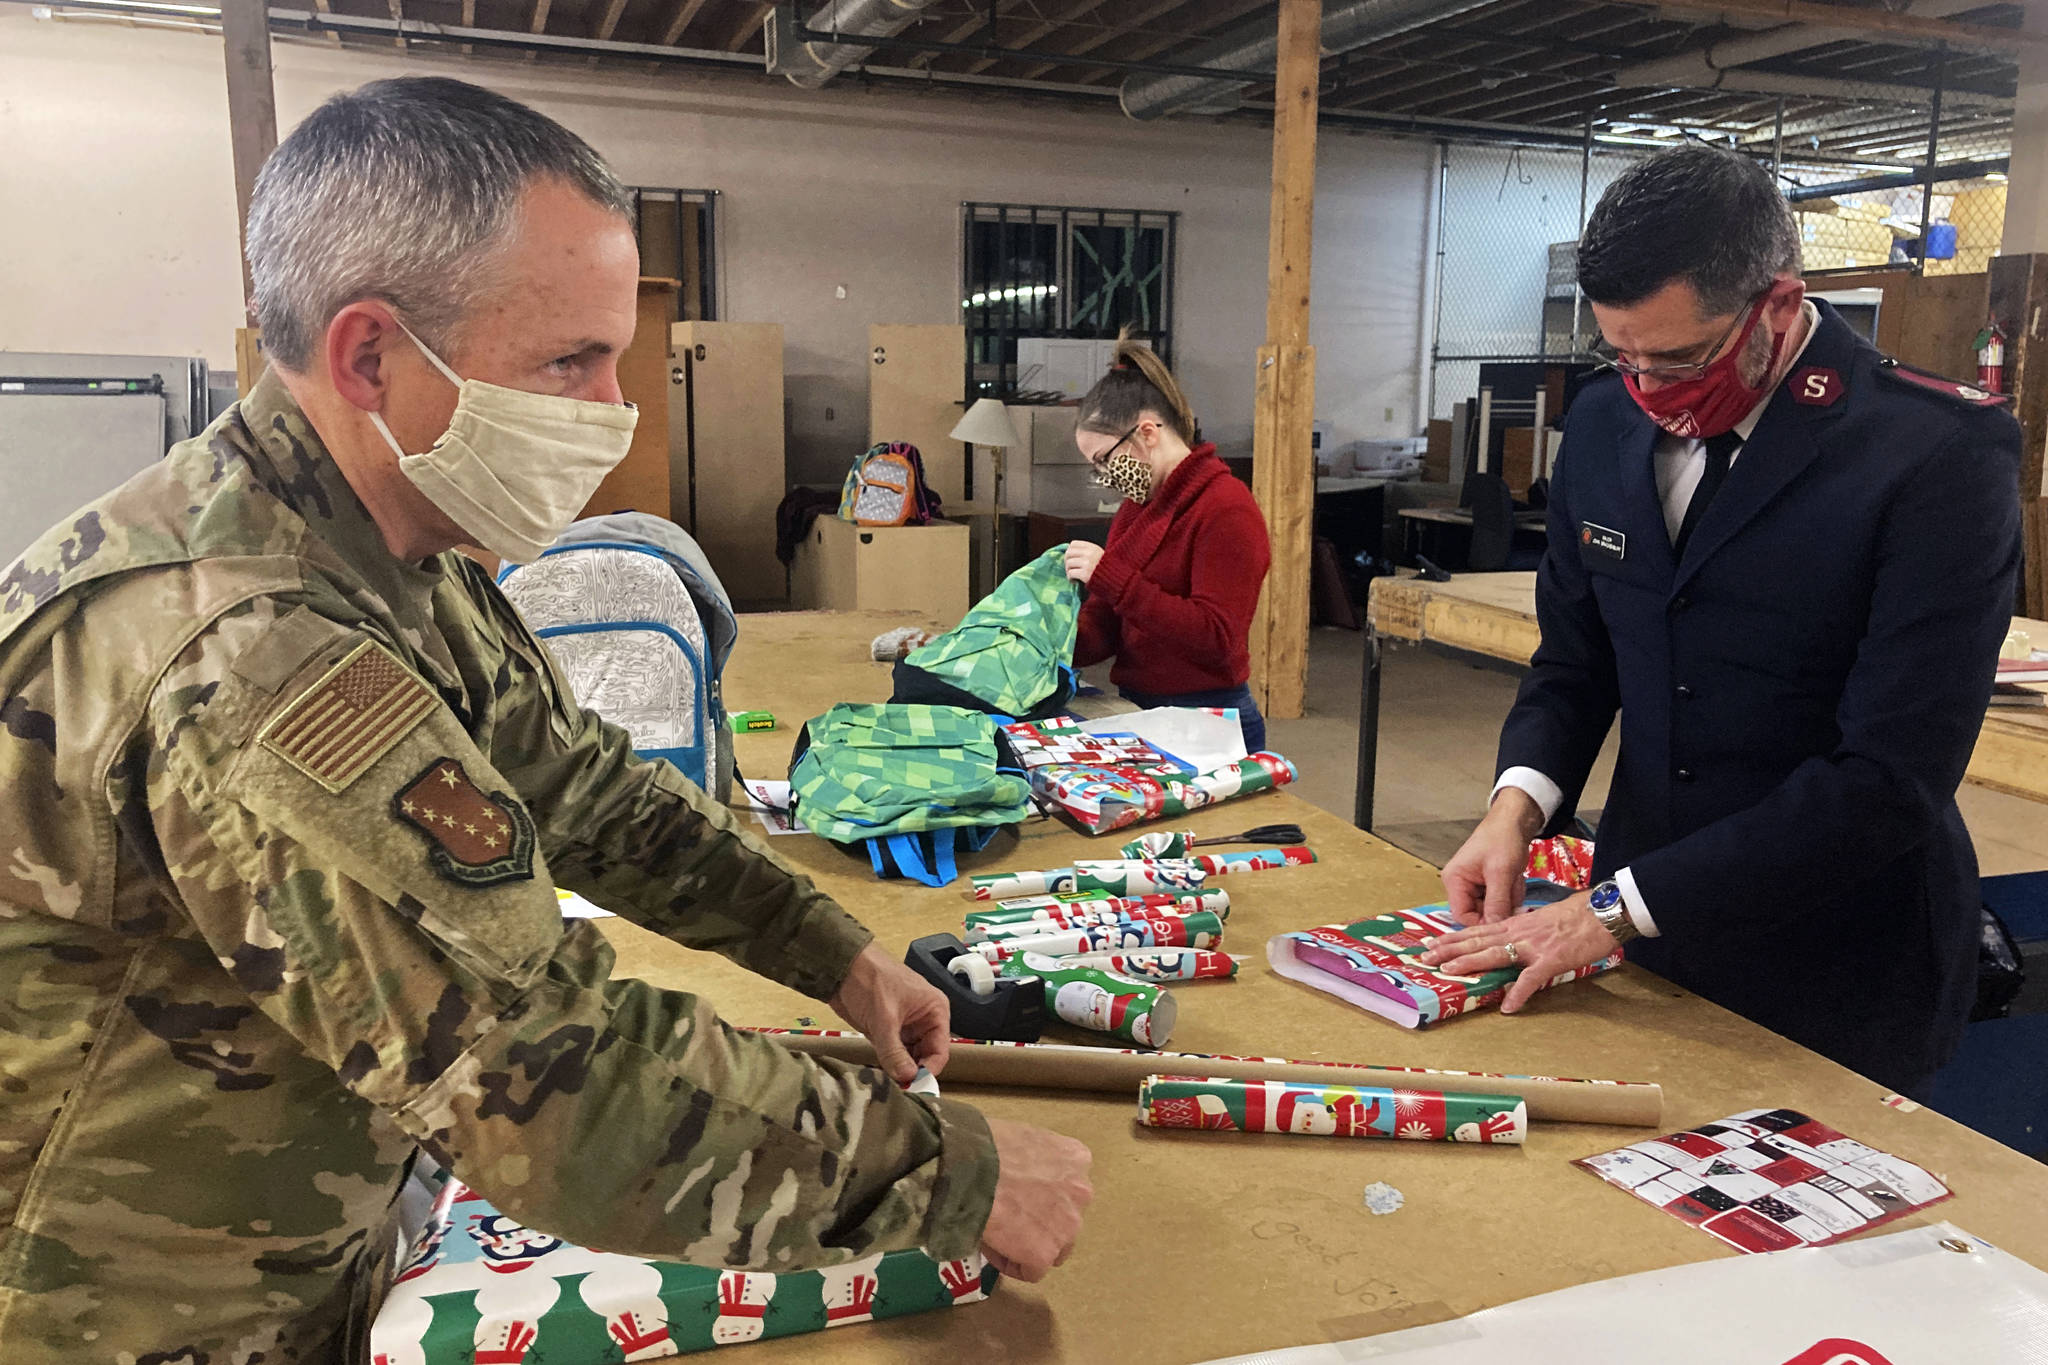 Chief Master Sgt. Winfield Hinkley Jr., Command Senior Enlisted Leader of the Alaska National Guard, left, Makayla Hikley, middle, and Maj. John Brackenbury, divisional commander with the Salvation Army, Alaska Division, wrap gifts in Anchorage, Alaska, that will be sent to children in three rural Alaska villages, on Nov. 17, 2020. The Alaska National Guard and the Salvation Army were able to provide and deliver gifts for the program’s 65th year, but had to scale back distribution parties that are normally held in the villages because of COVID-19. (AP Photo / Mark Thiessen)